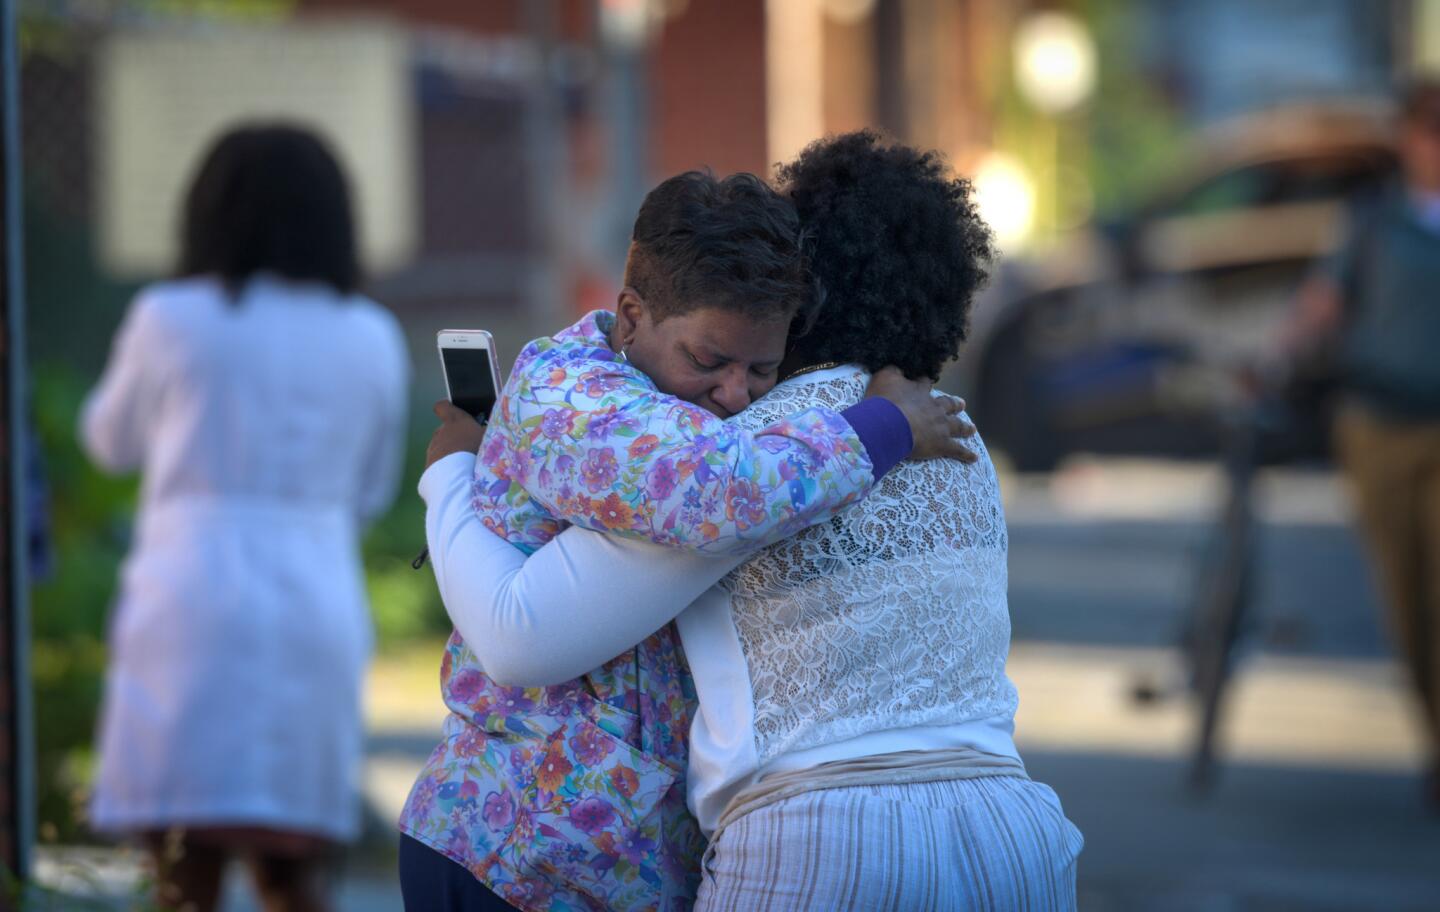 Two women embrace in an alley behind the Man Alive drug treatment center on Maryland Avenue shortly after a shooting. Baltimore police say an officer and at least one other person, the suspect, were shot at the center.